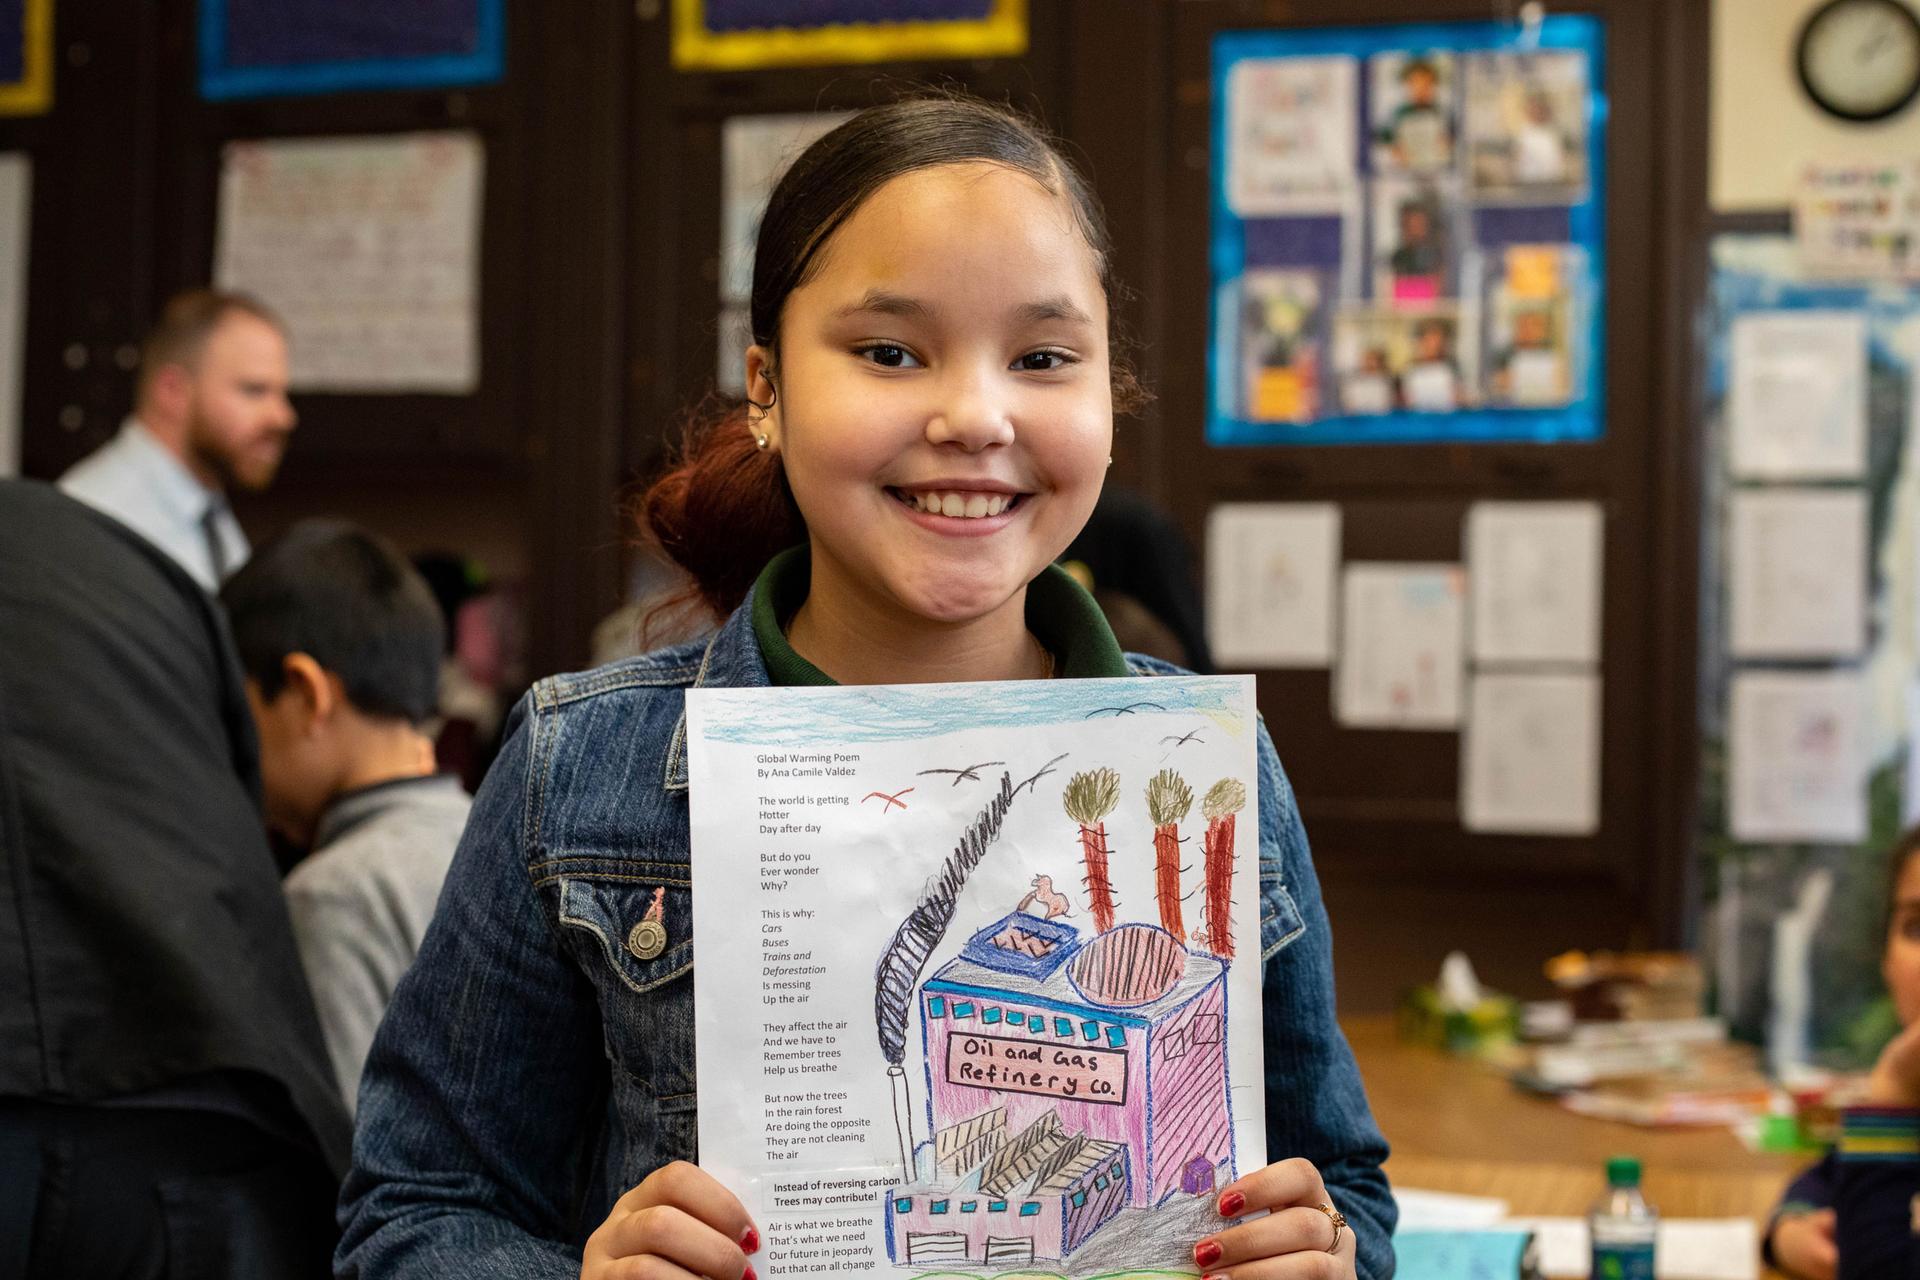 A young girl holds a photo of her poem with her illustrations on it in her school classroom and smiles at the camera